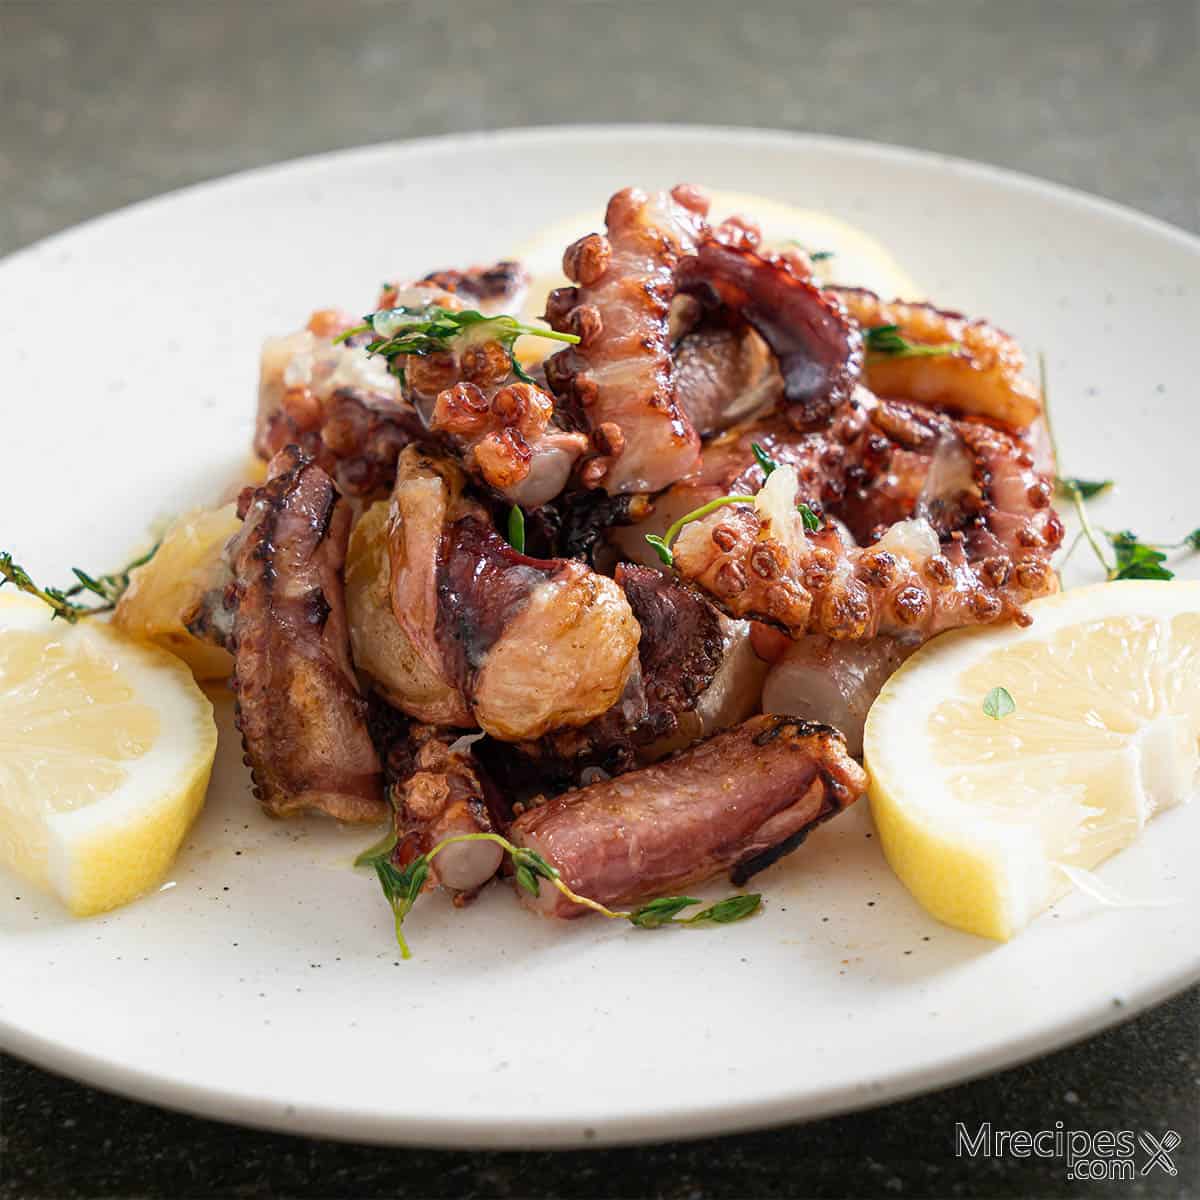 Brined and Smoked Octopus Recipe